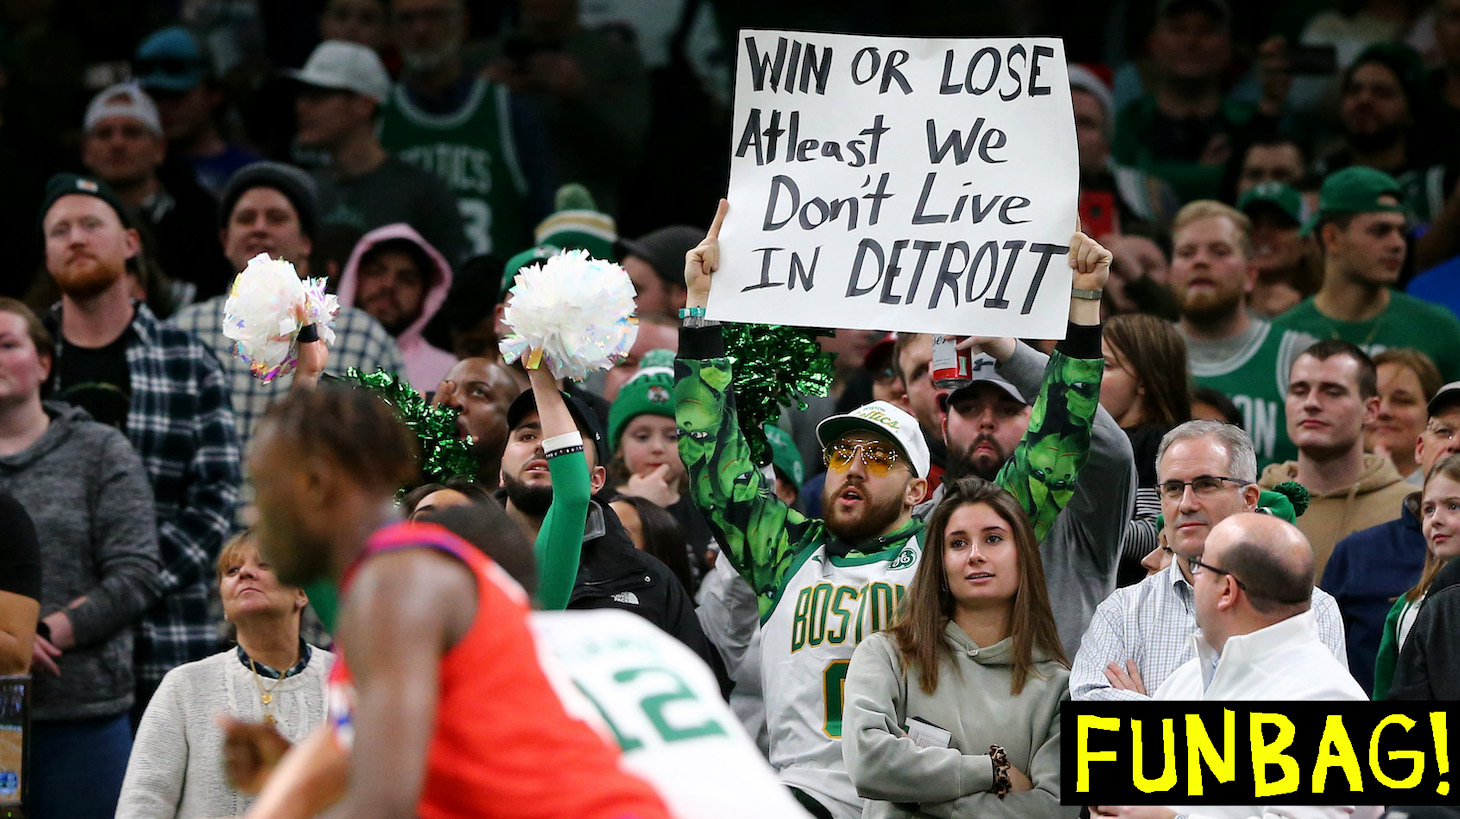 BOSTON, MASSACHUSETTS - DECEMBER 20: A Boston Celtics fan holds a sign during the game against the Detroit Pistons at TD Garden on December 20, 2019 in Boston, Massachusetts. The Celtics defeat the Pistons 114-93. NOTE TO USER: User expressly acknowledges and agrees that, by downloading and or using this photograph, User is consenting to the terms and conditions of the Getty Images License Agreement. (Photo by Maddie Meyer/Getty Images)